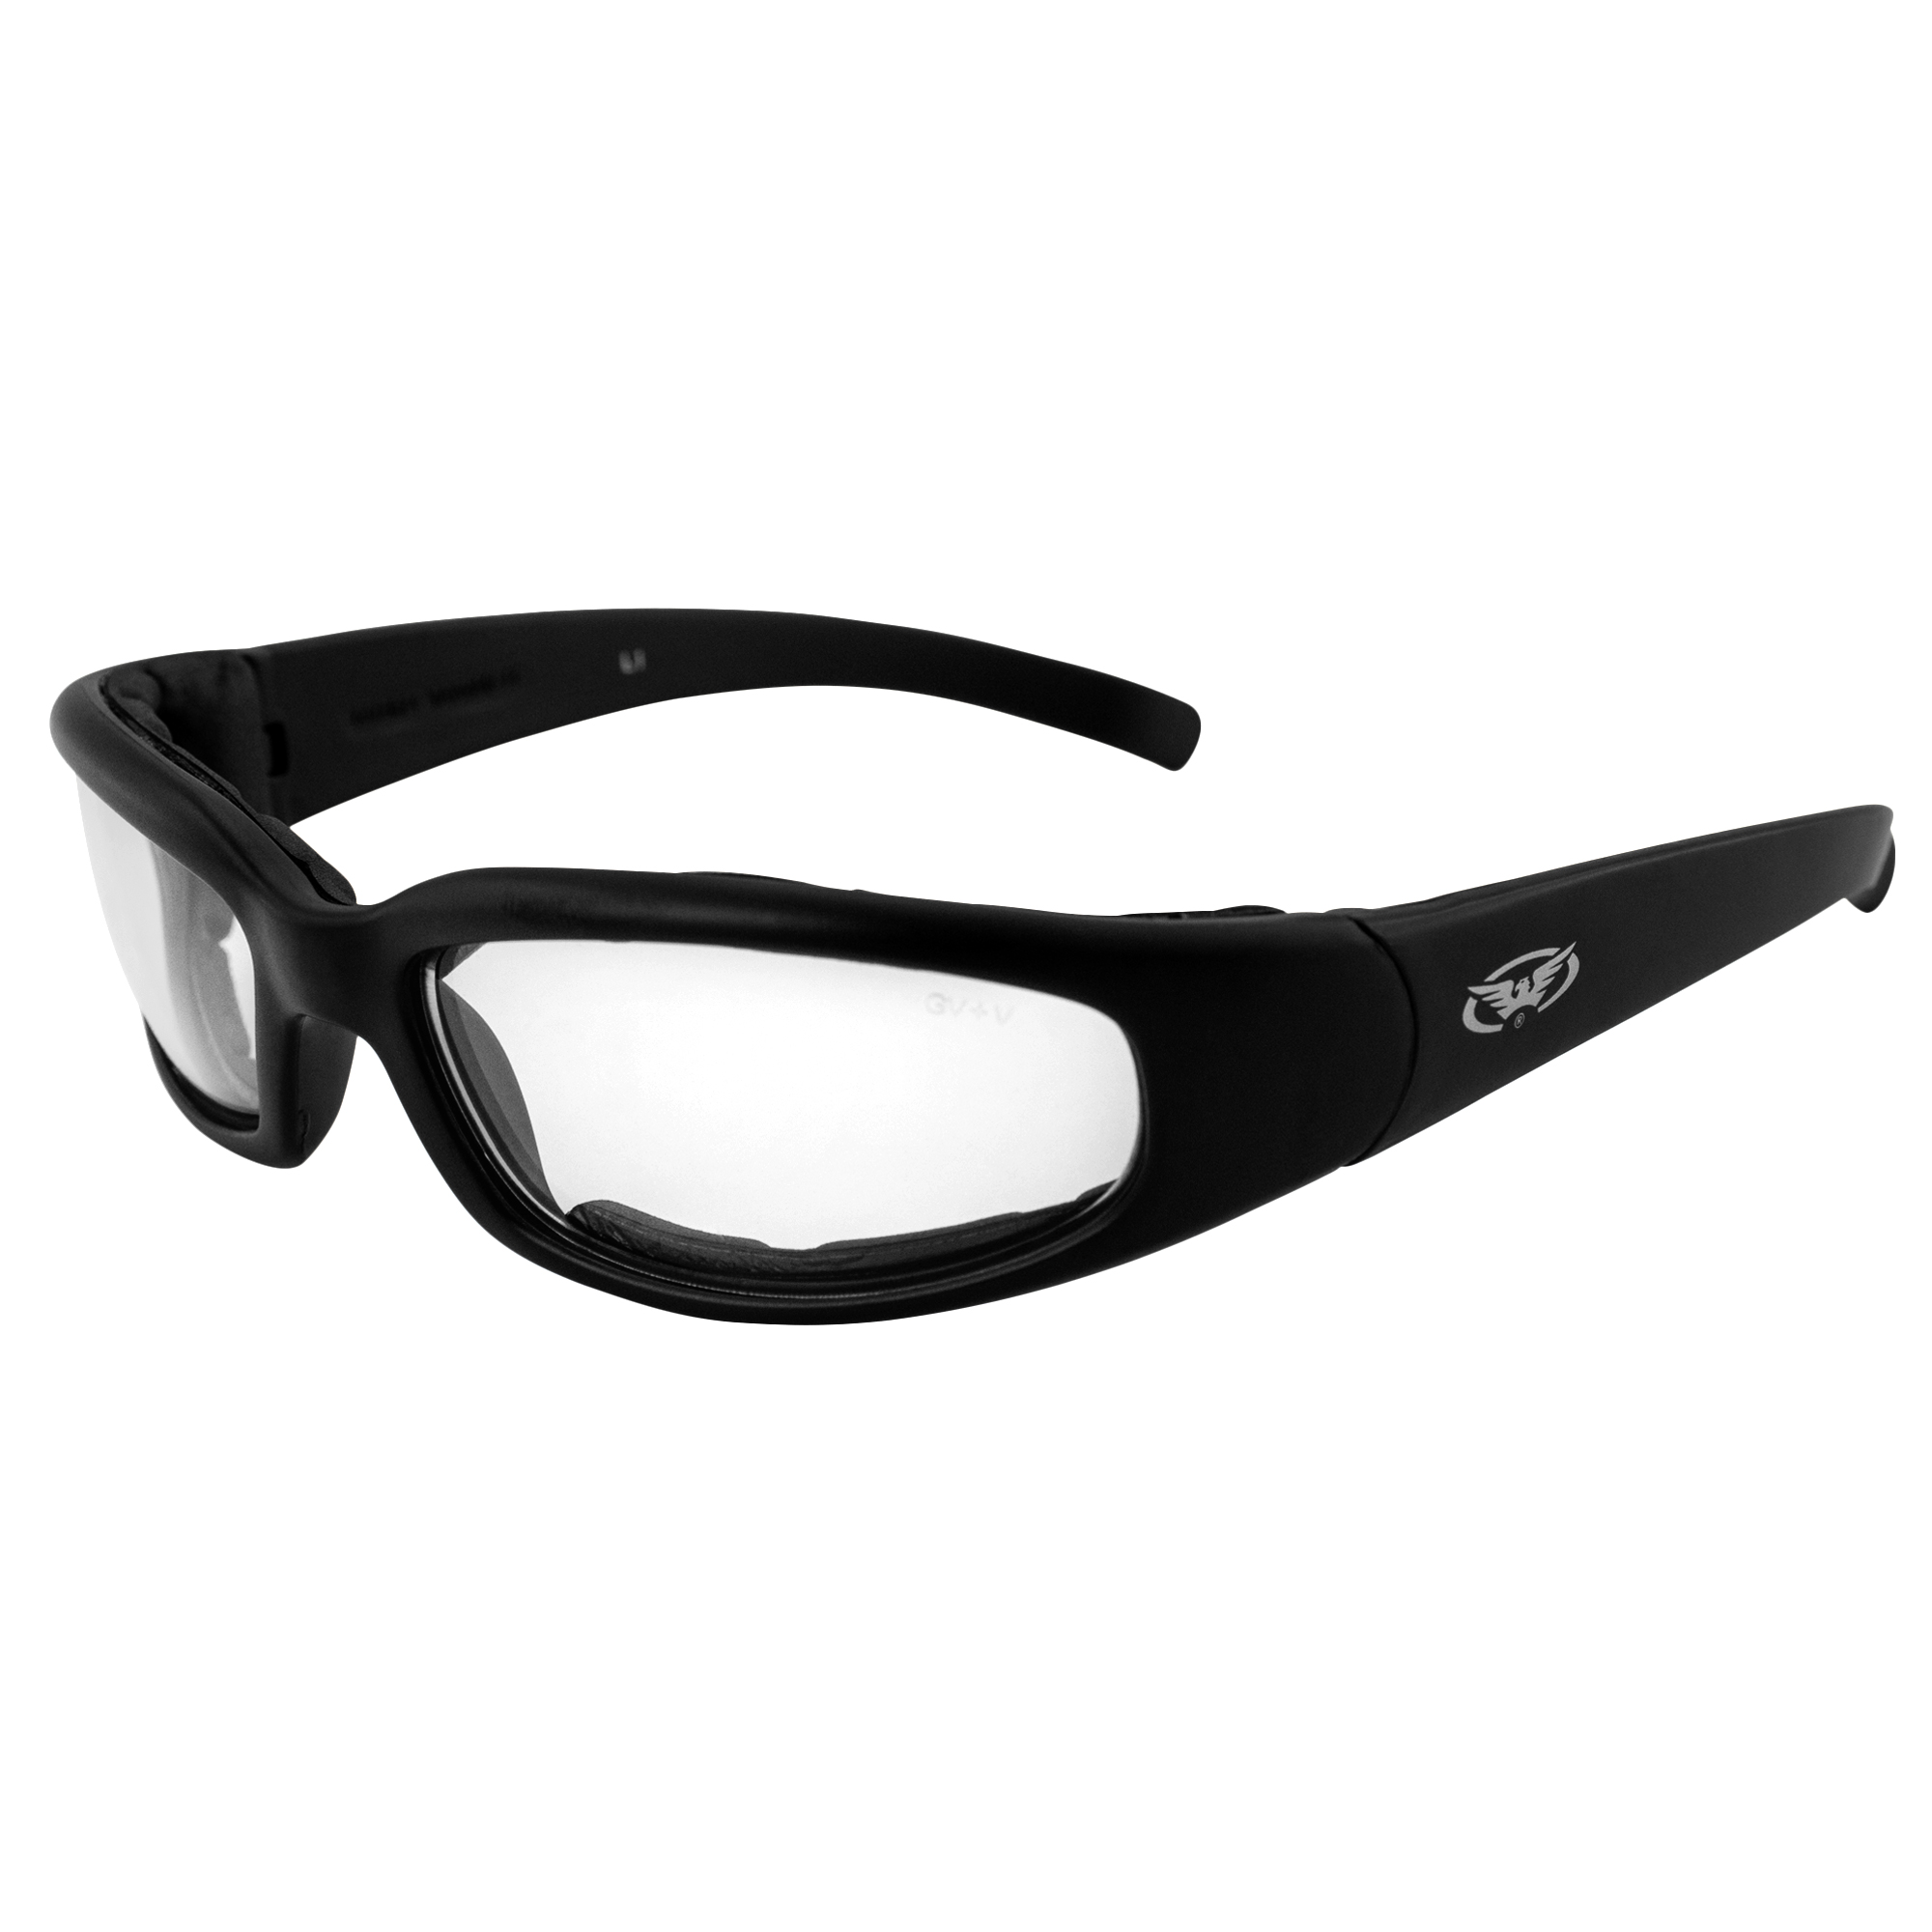 CHICAGO24 Mens Chicago 24 Sunglasses with Photochromic Color Changing Lenses (Black Frame/Clear-Smoke Lens) - image 1 of 9